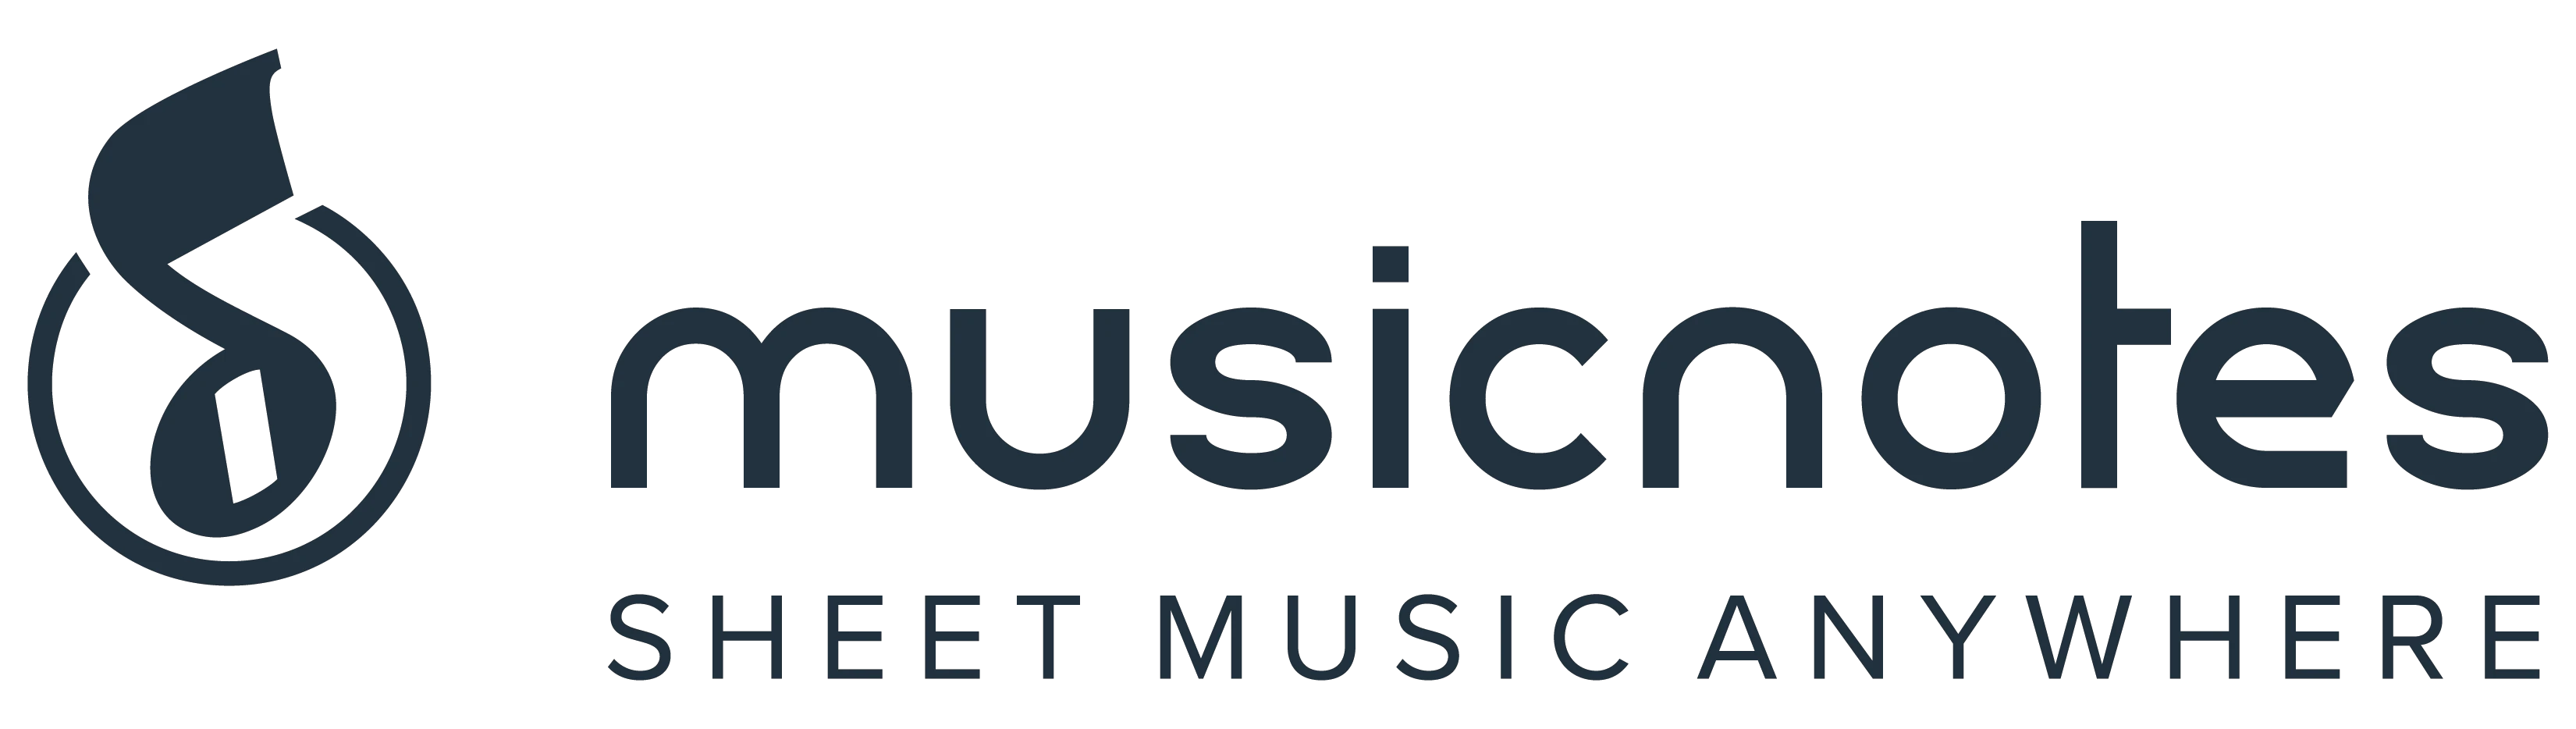 Musicnotes Codes promotionnels 